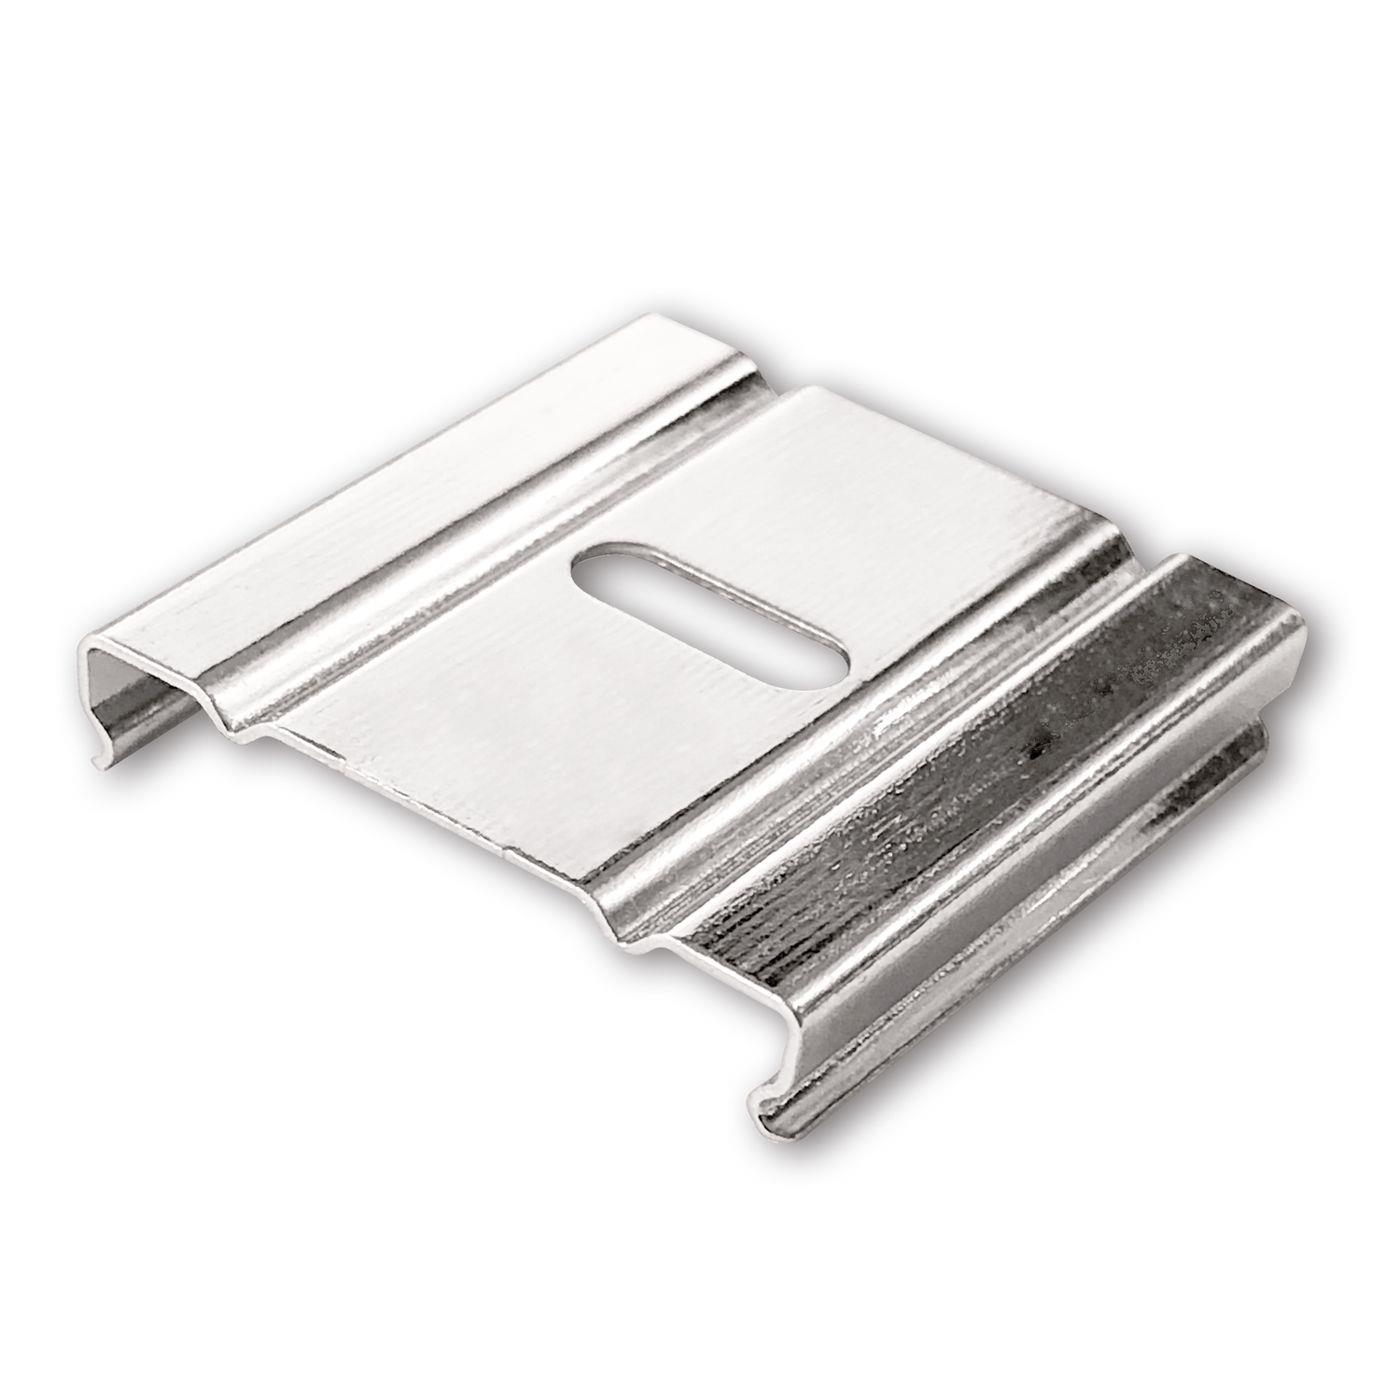 Retaining clip Z30 for luminaire profile TWIN LL2 Steel Silver